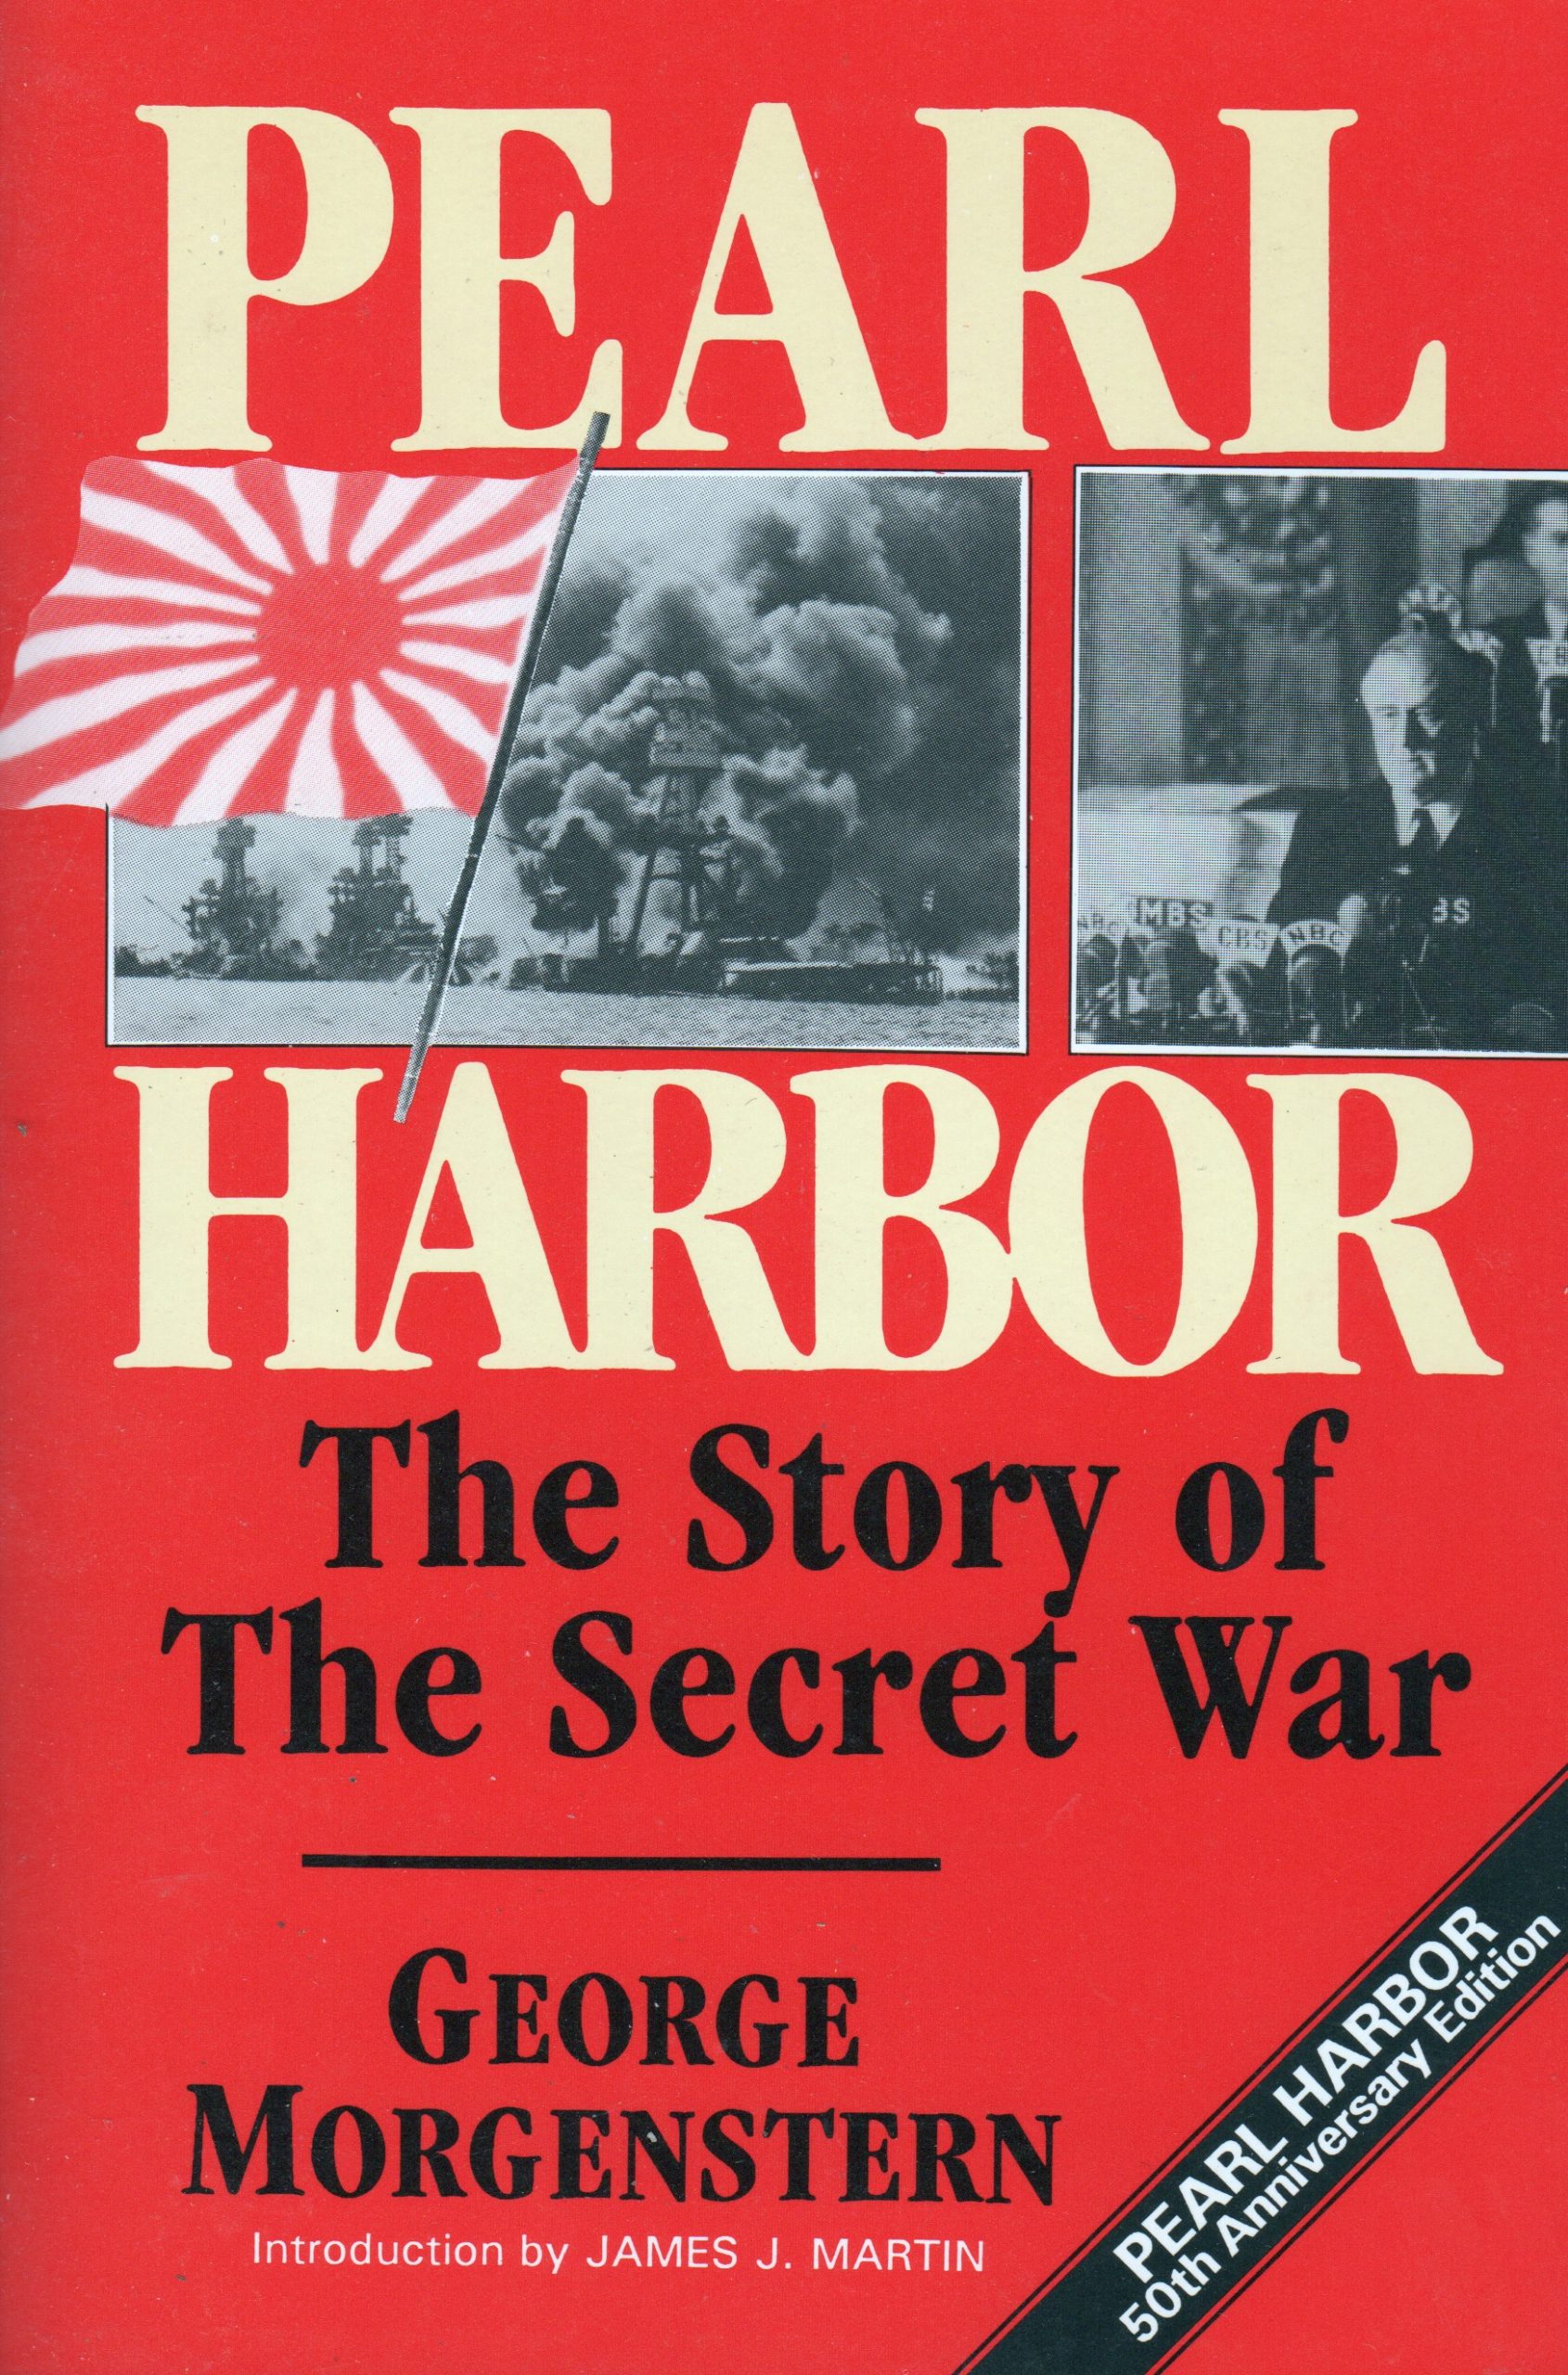 When did the yorktown sorty from pearl harbor - maingoods